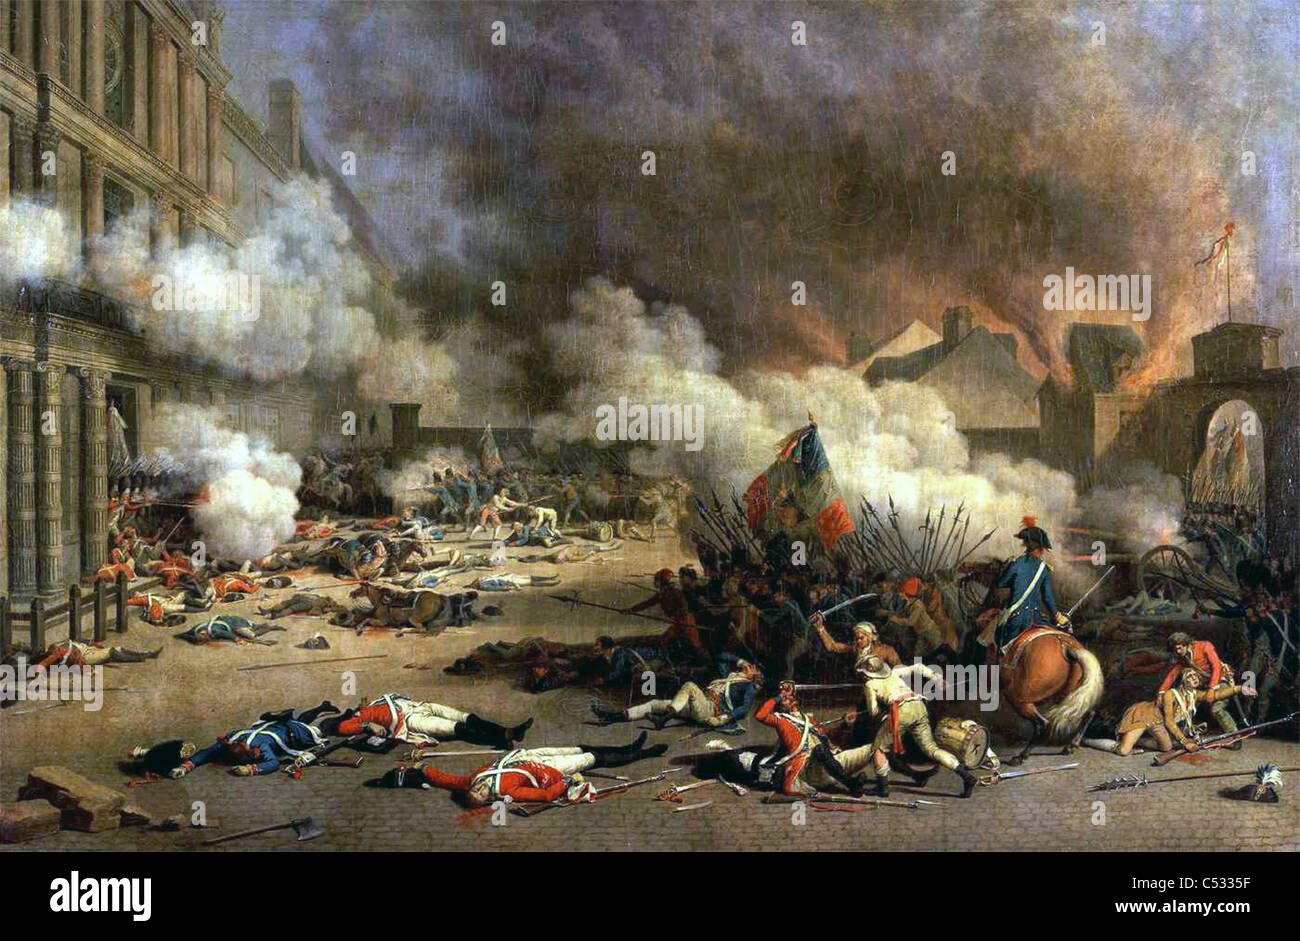 FRENCH REVOLUTION The Paris Commune storm the Tuileries Palace on 10 August 1792, painted by Jean Duplessis-Bertaux Stock Photo